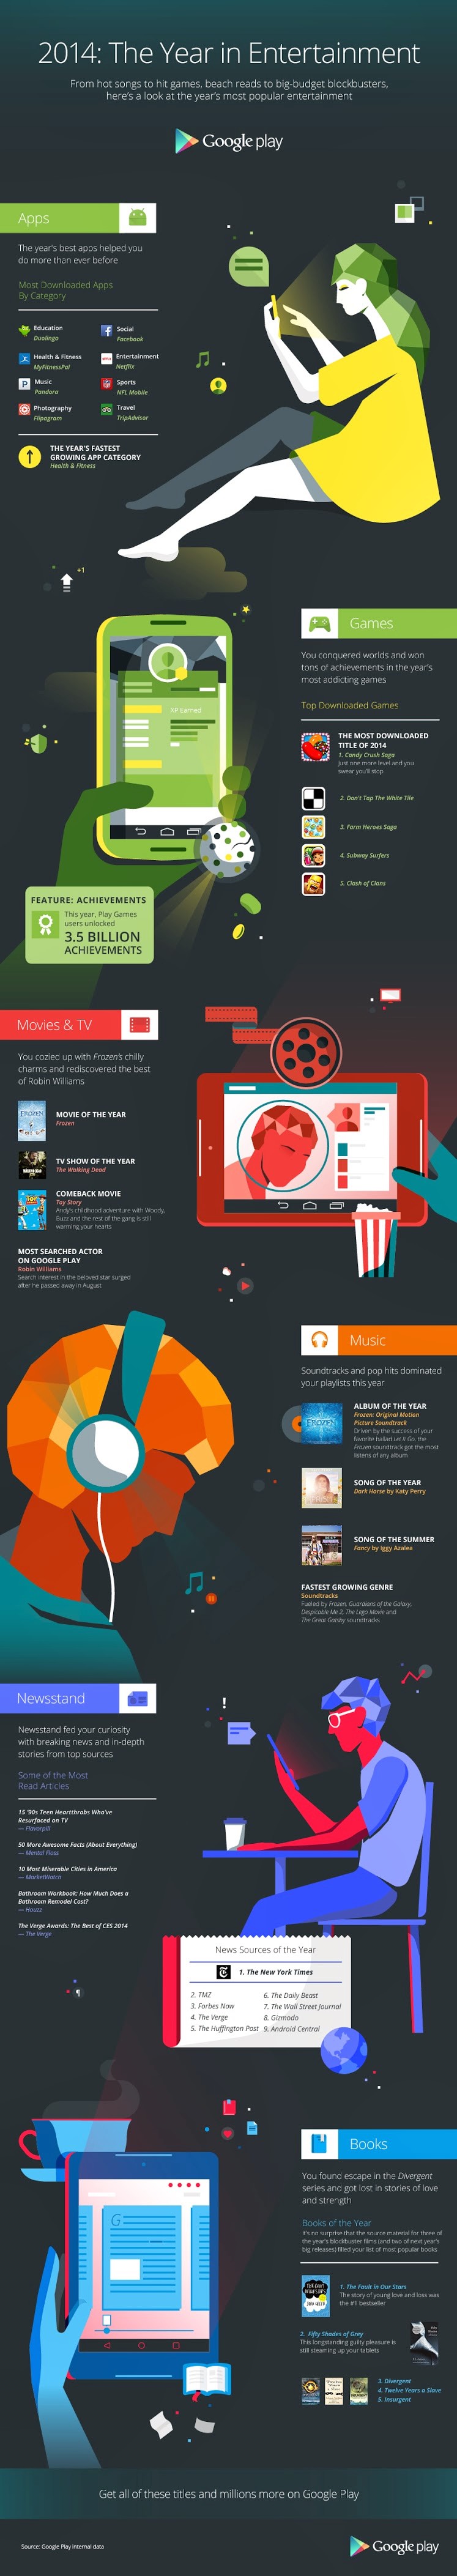 Popular Apps, Games, and Books of 2014